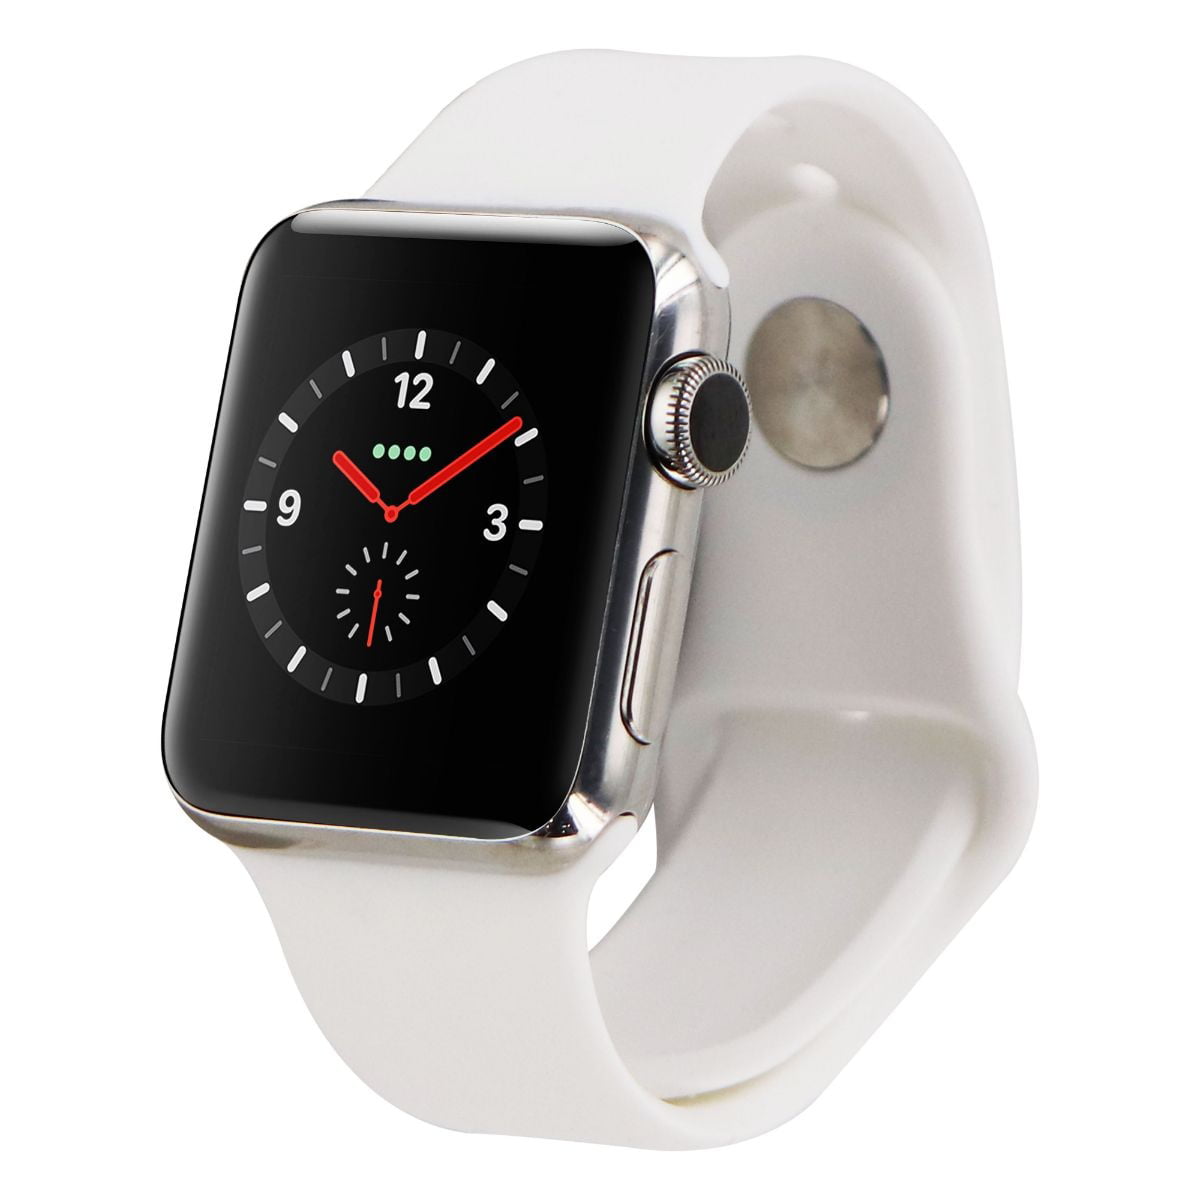 Apple Watch Series 2 (38mm) A1757 (GPS) Stainless Steel / White Sport ...